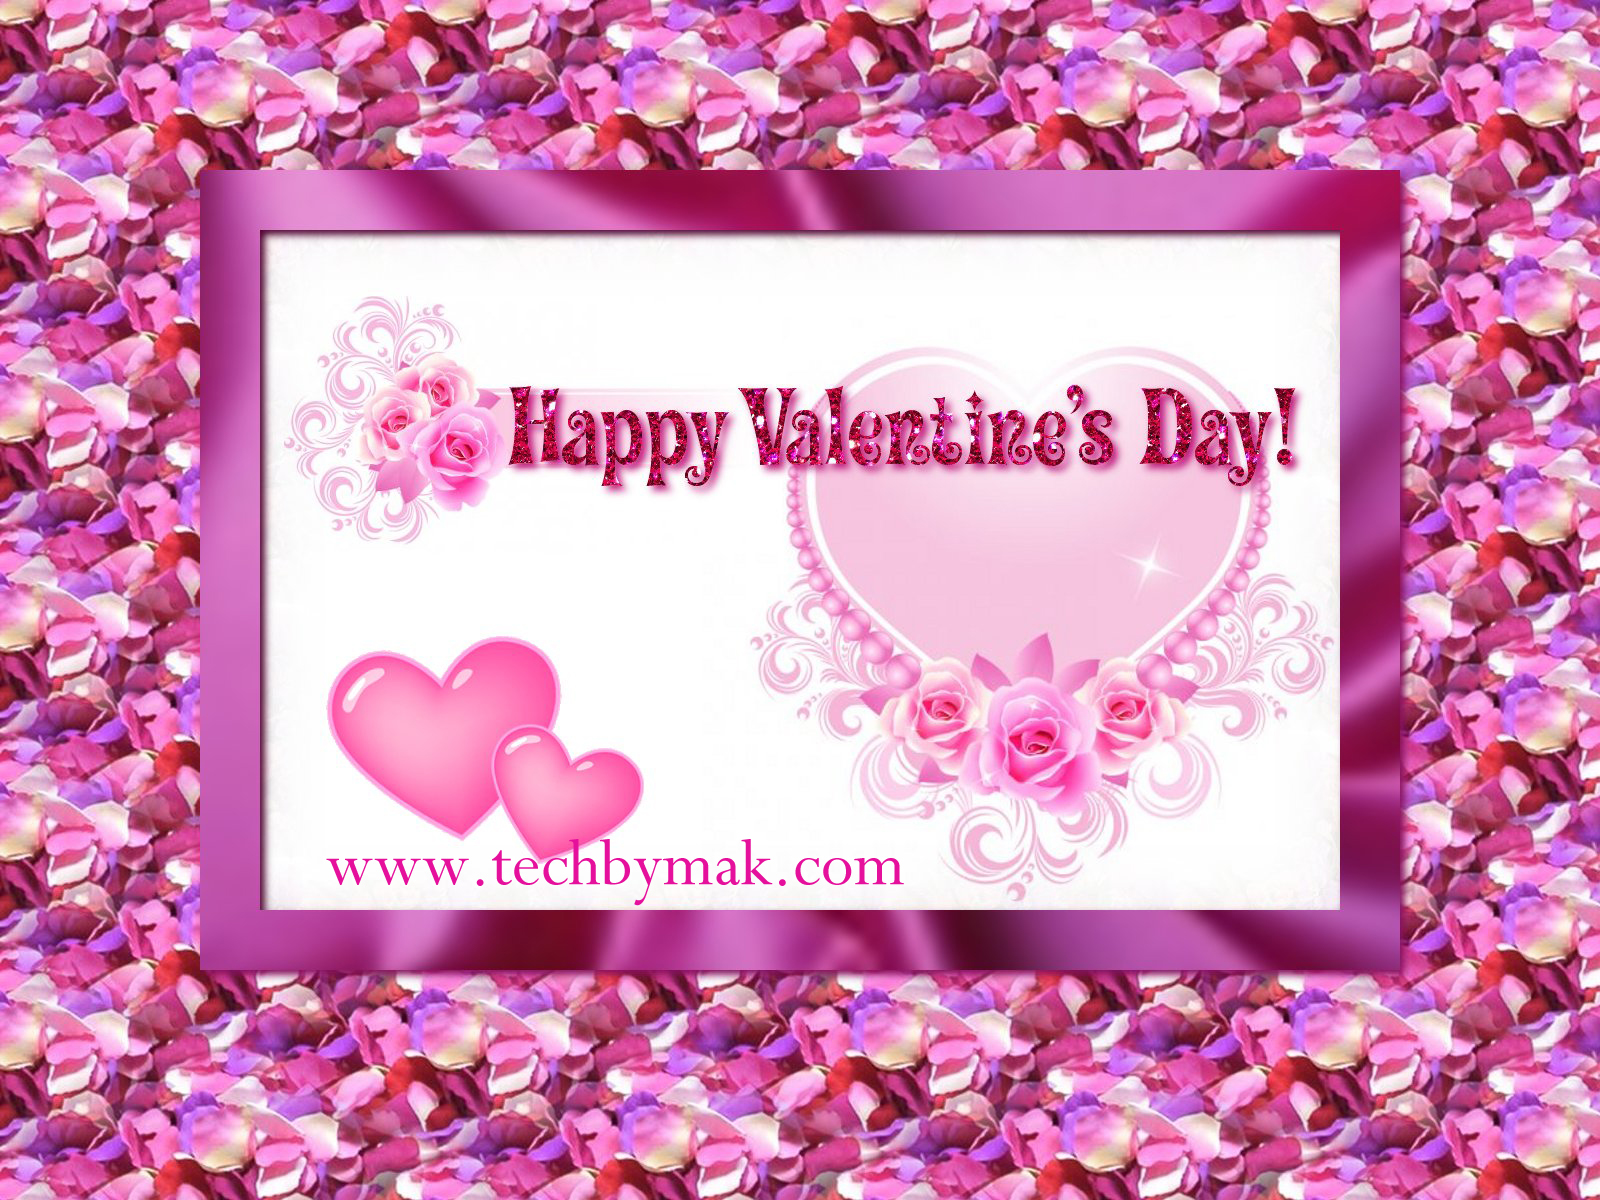 Happy Valentines day Pictures,photos and wallpapers 20161600 x 1200